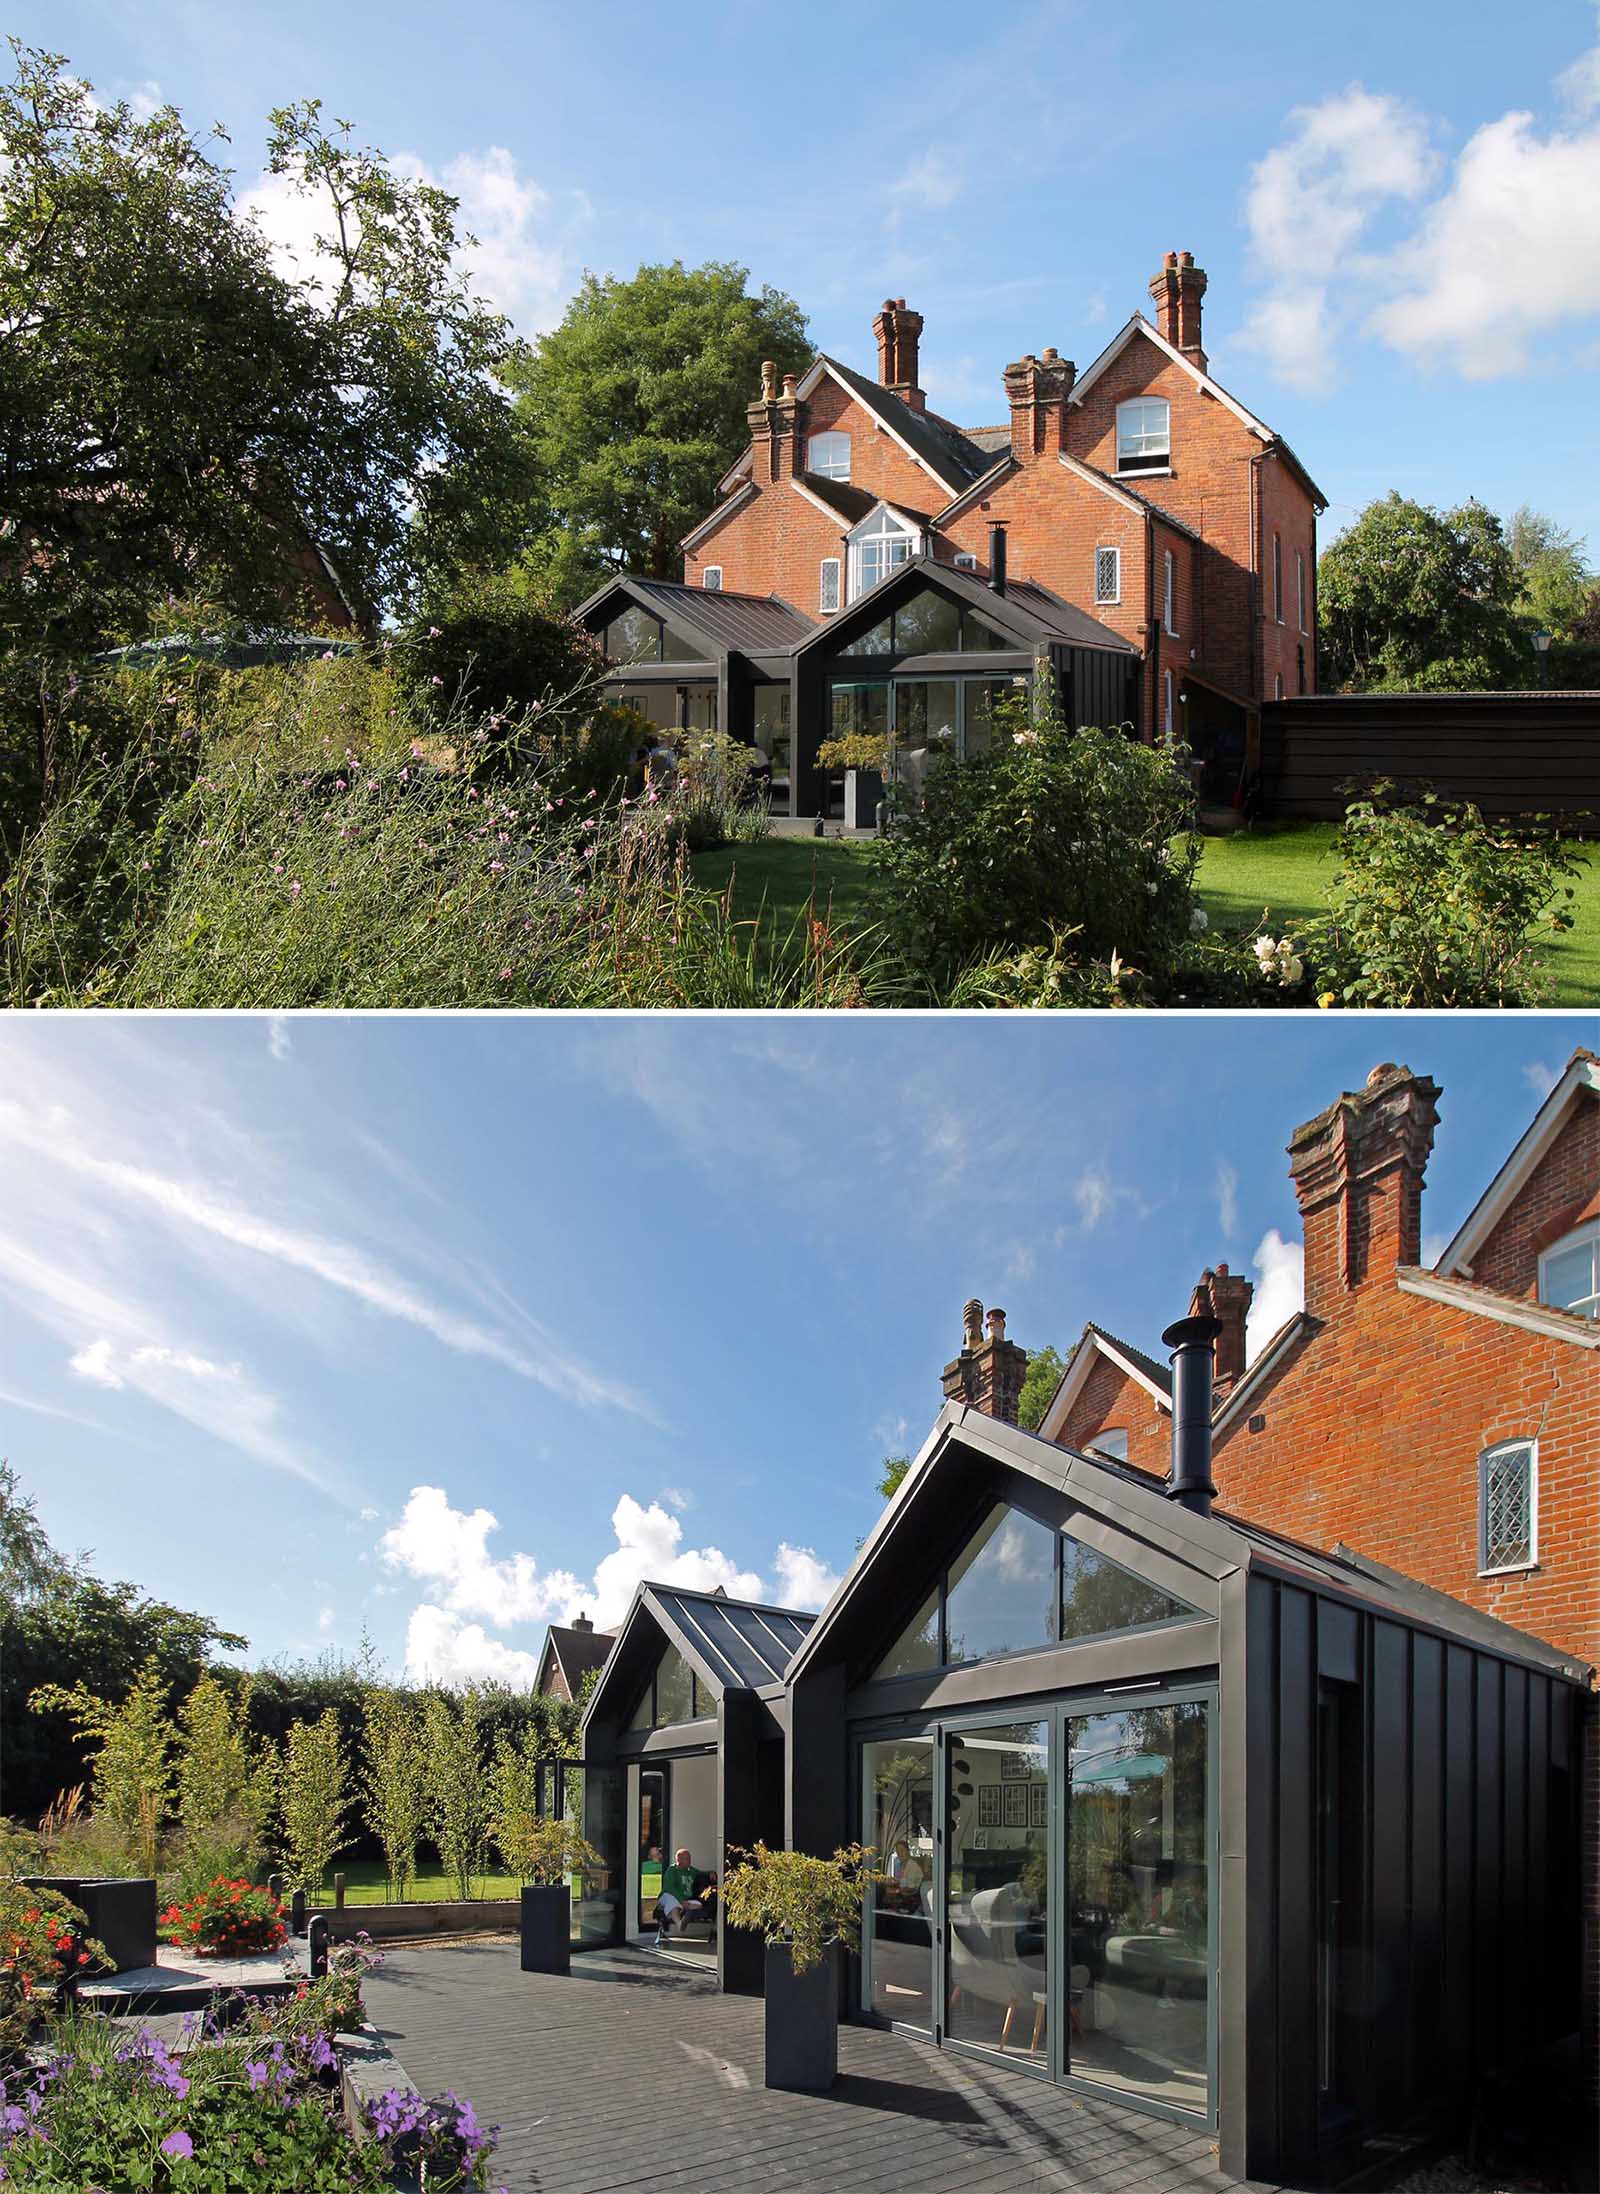 A modern extension with pitched roofs and black in black zinc.